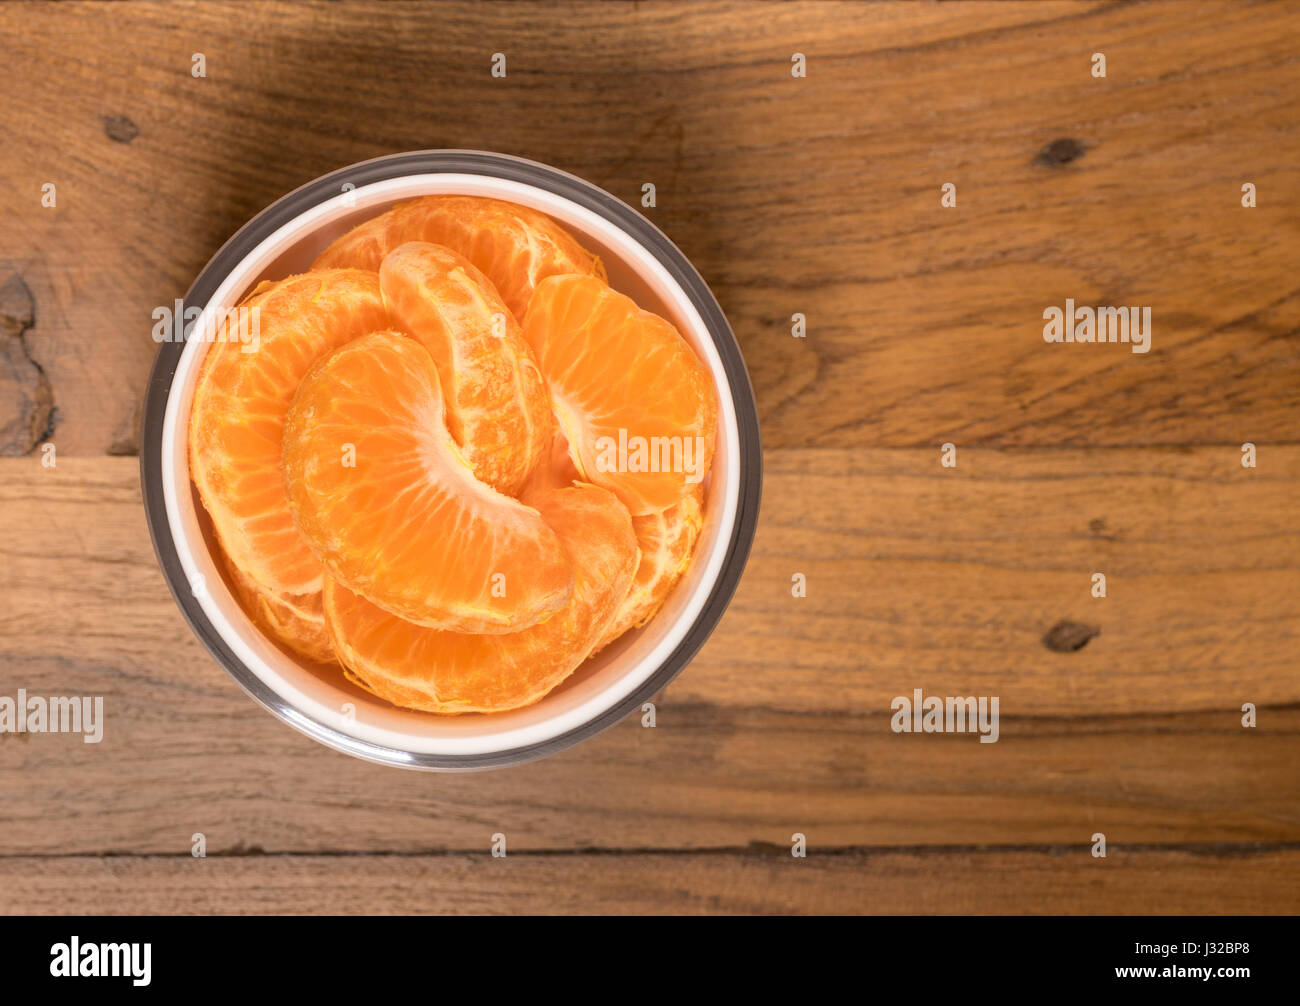 Orange or tangerine slices in a bowl on a wooden table surface Stock Photo